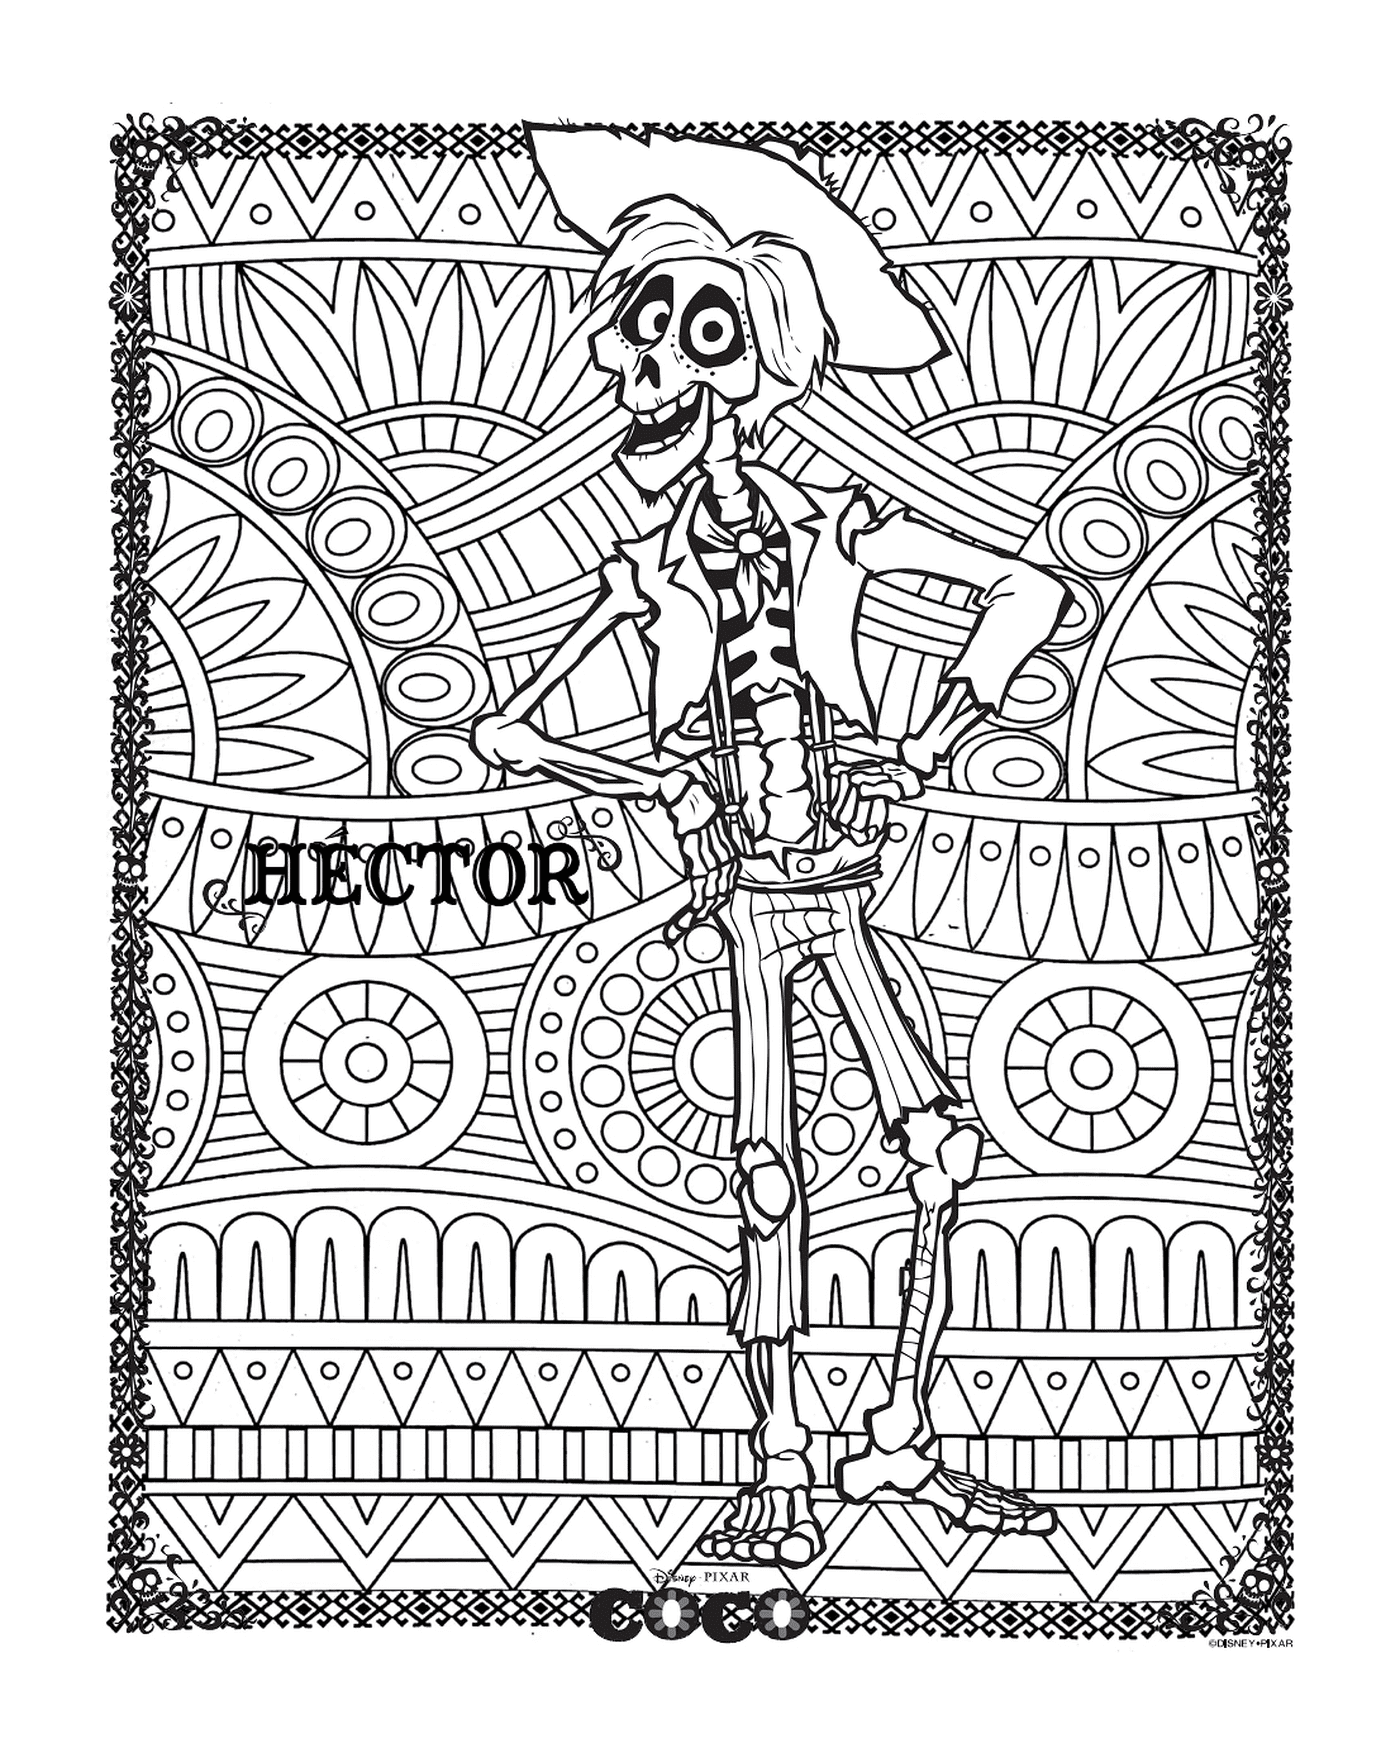  Hector of Coco in a mandala 